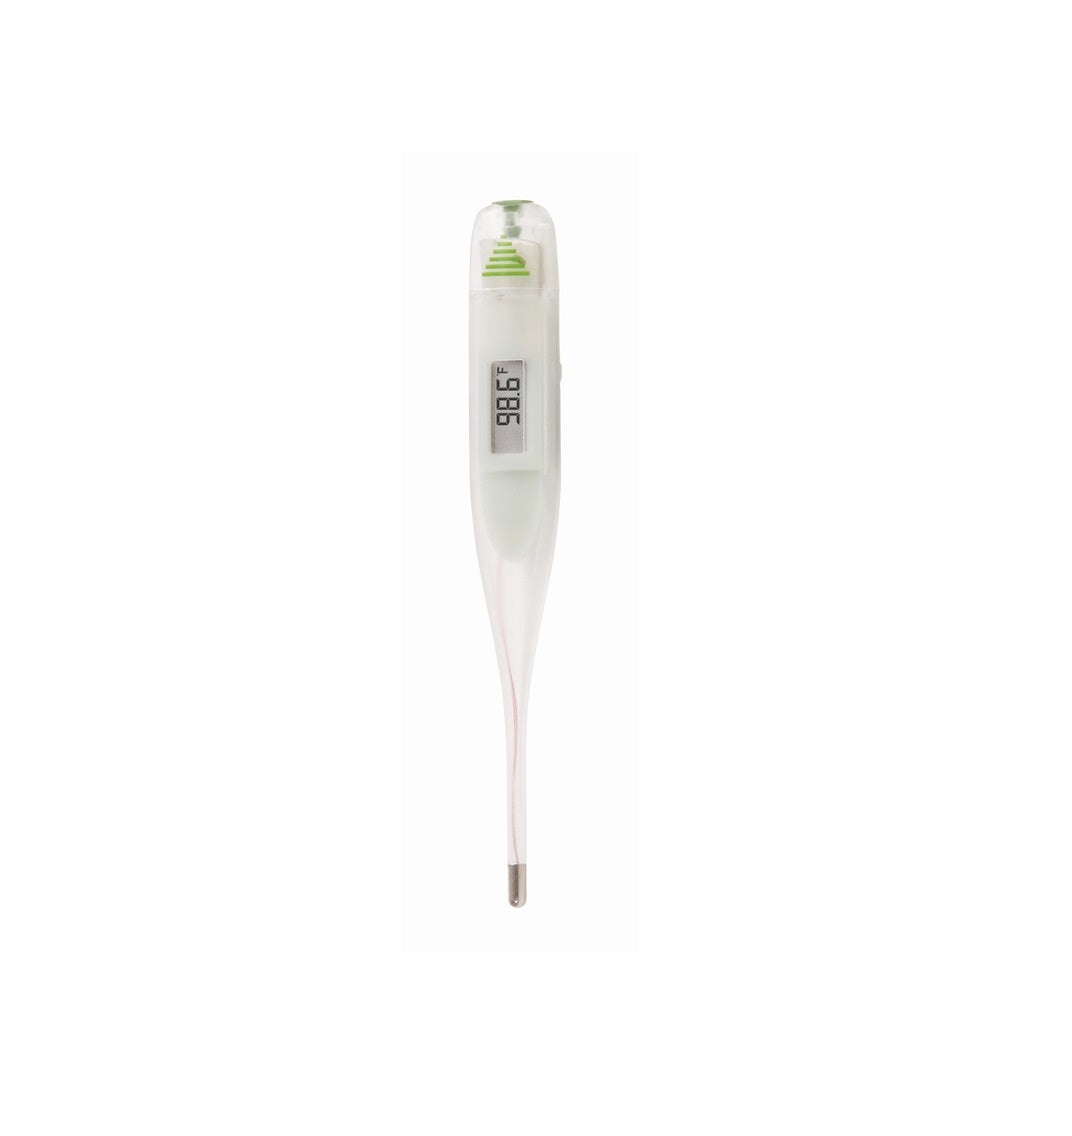 Veridian Healthcare 08-350 Digital Thermometer, White